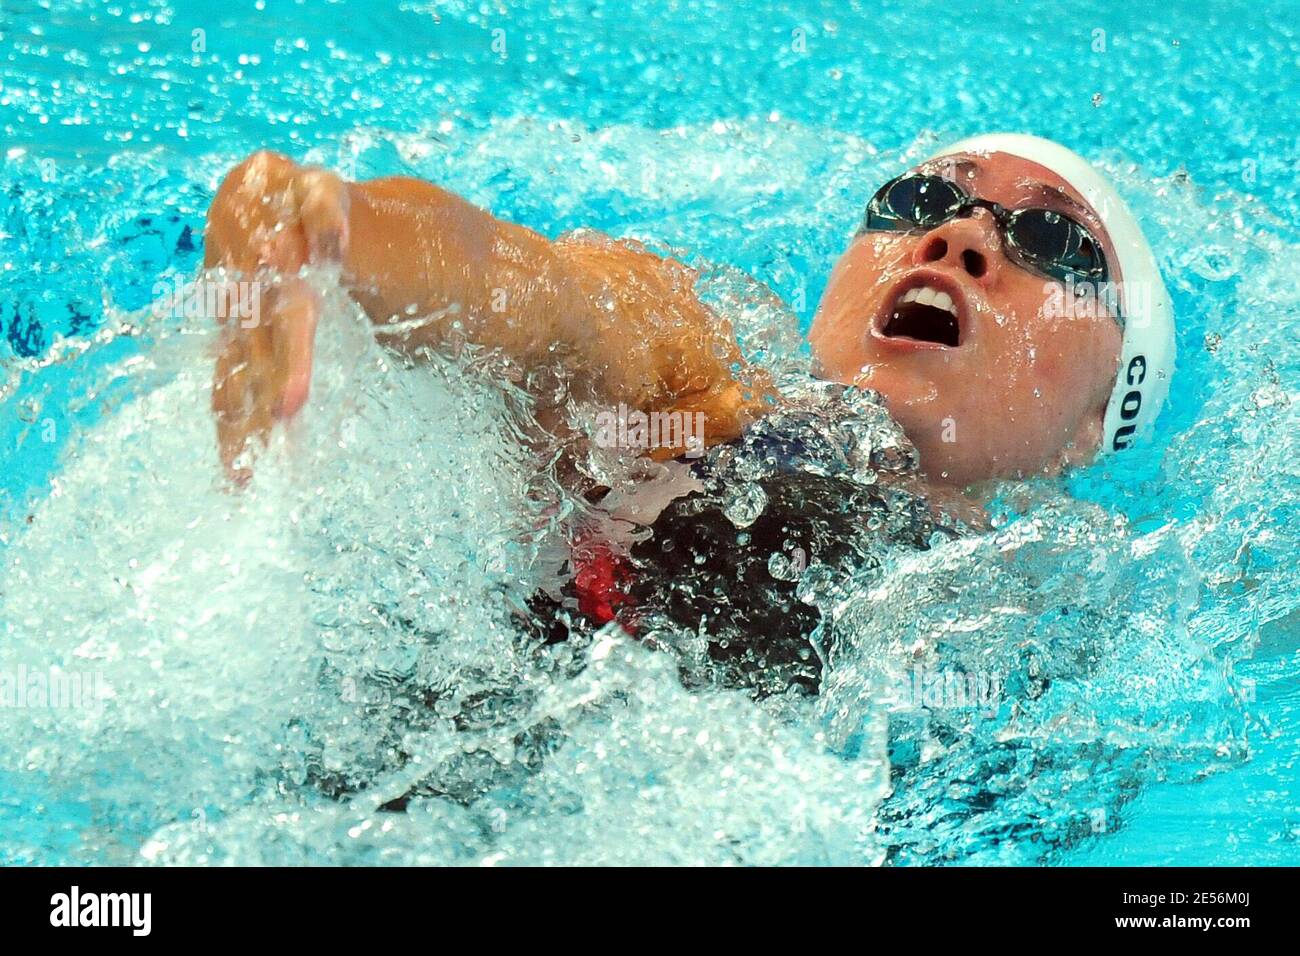 USA's Natalie Coughlin competes on women's 200 meters individual medley during the XXIX Olympic games day 3 at the Olympic National aquatic center in Beijing, China on August 11, 2008. Photo by Gouhier-Hahn-Nebinger/Cameleon/ABACAPRESS.COM Stock Photo